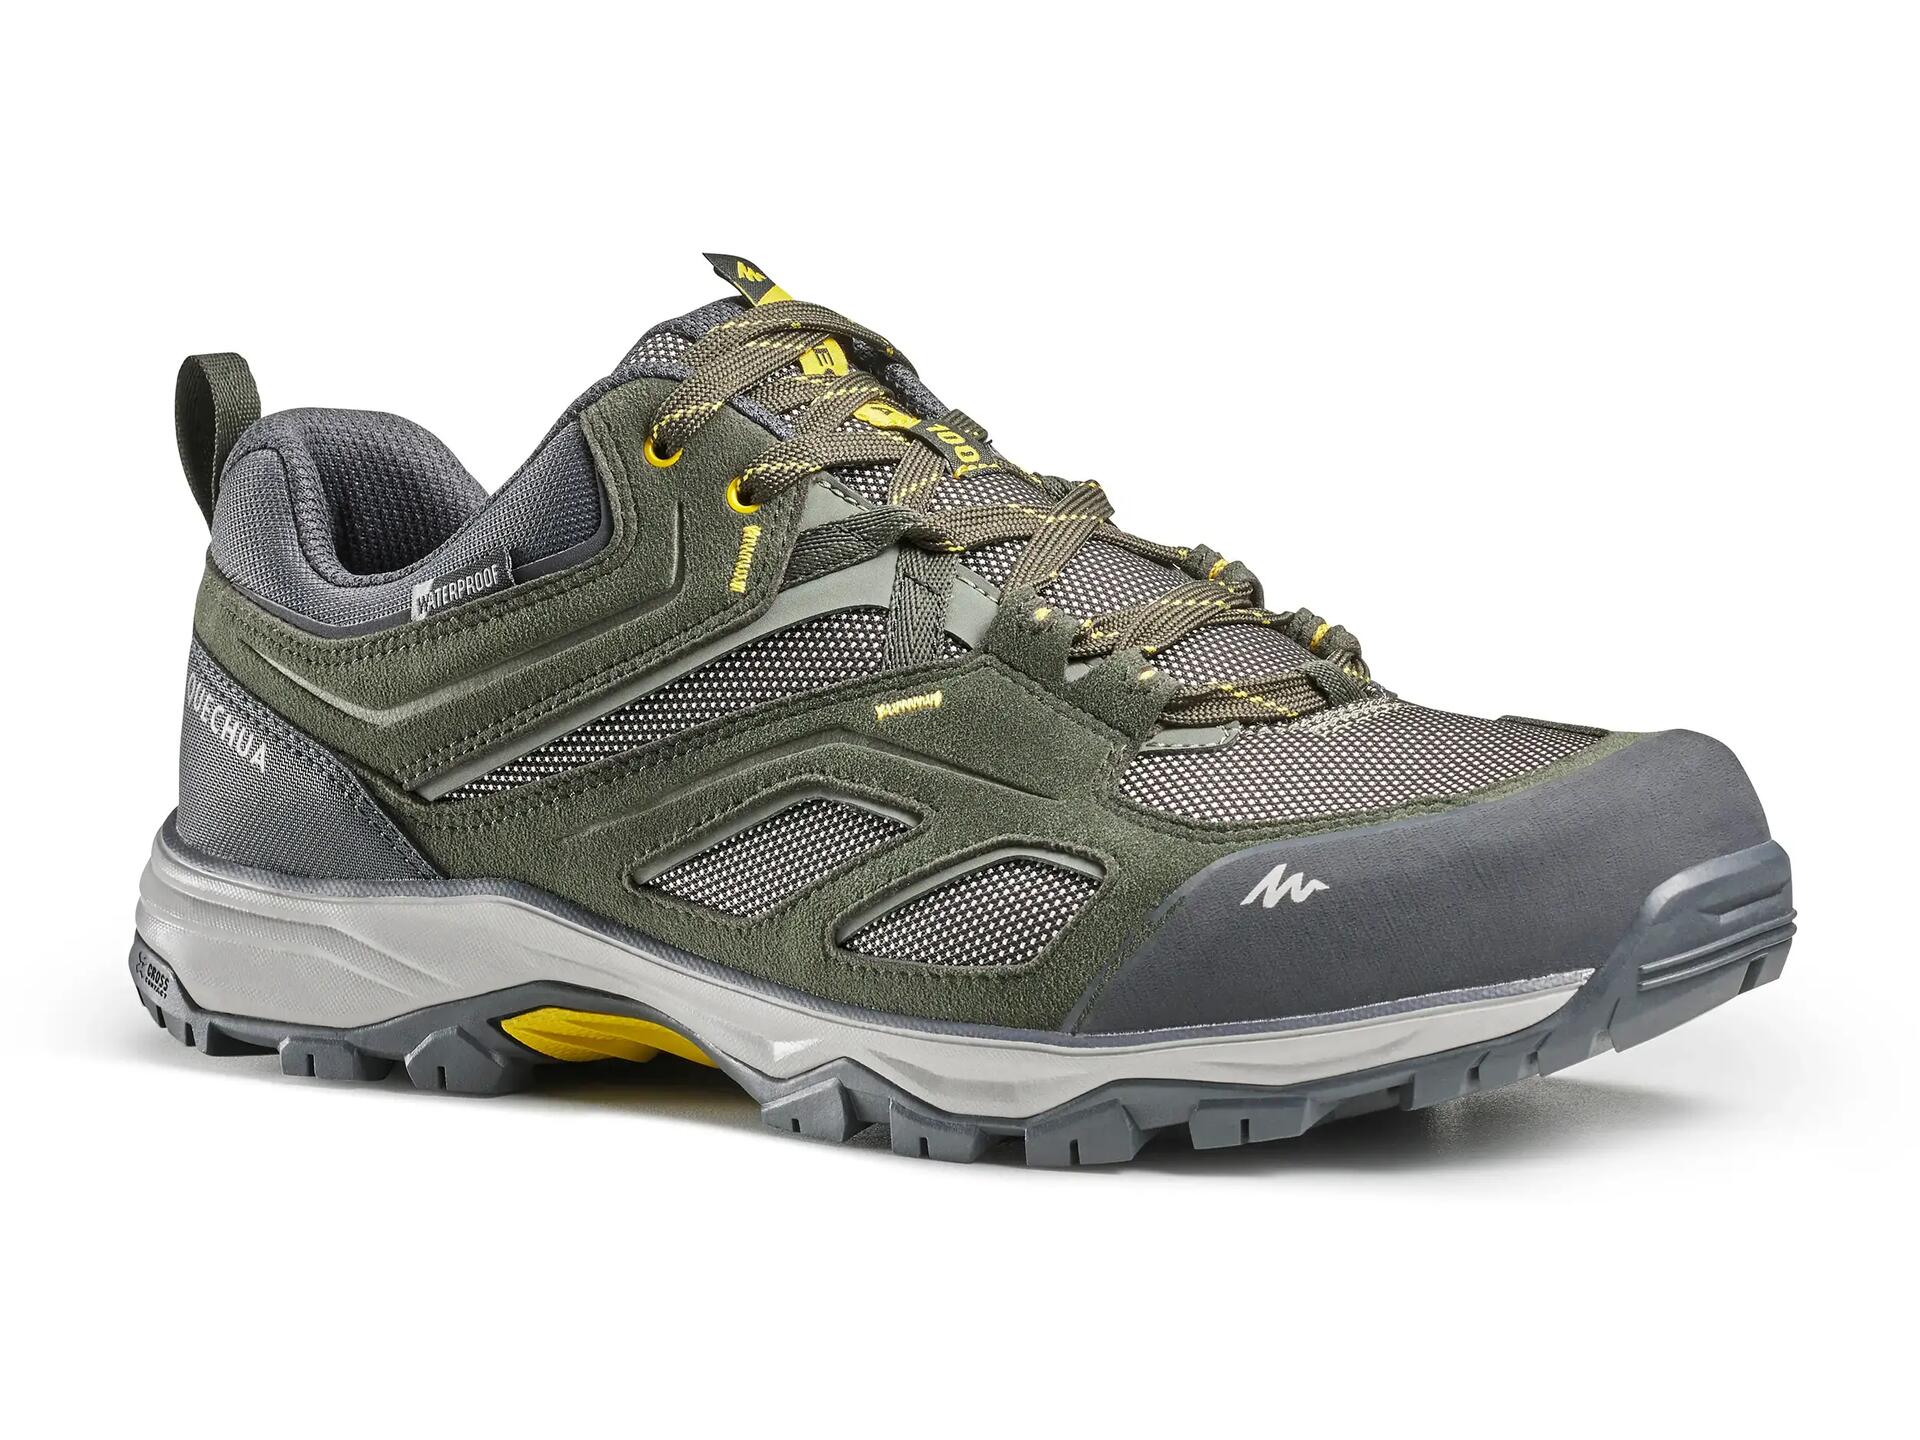 What's the right way to lace up your trekking shoes?